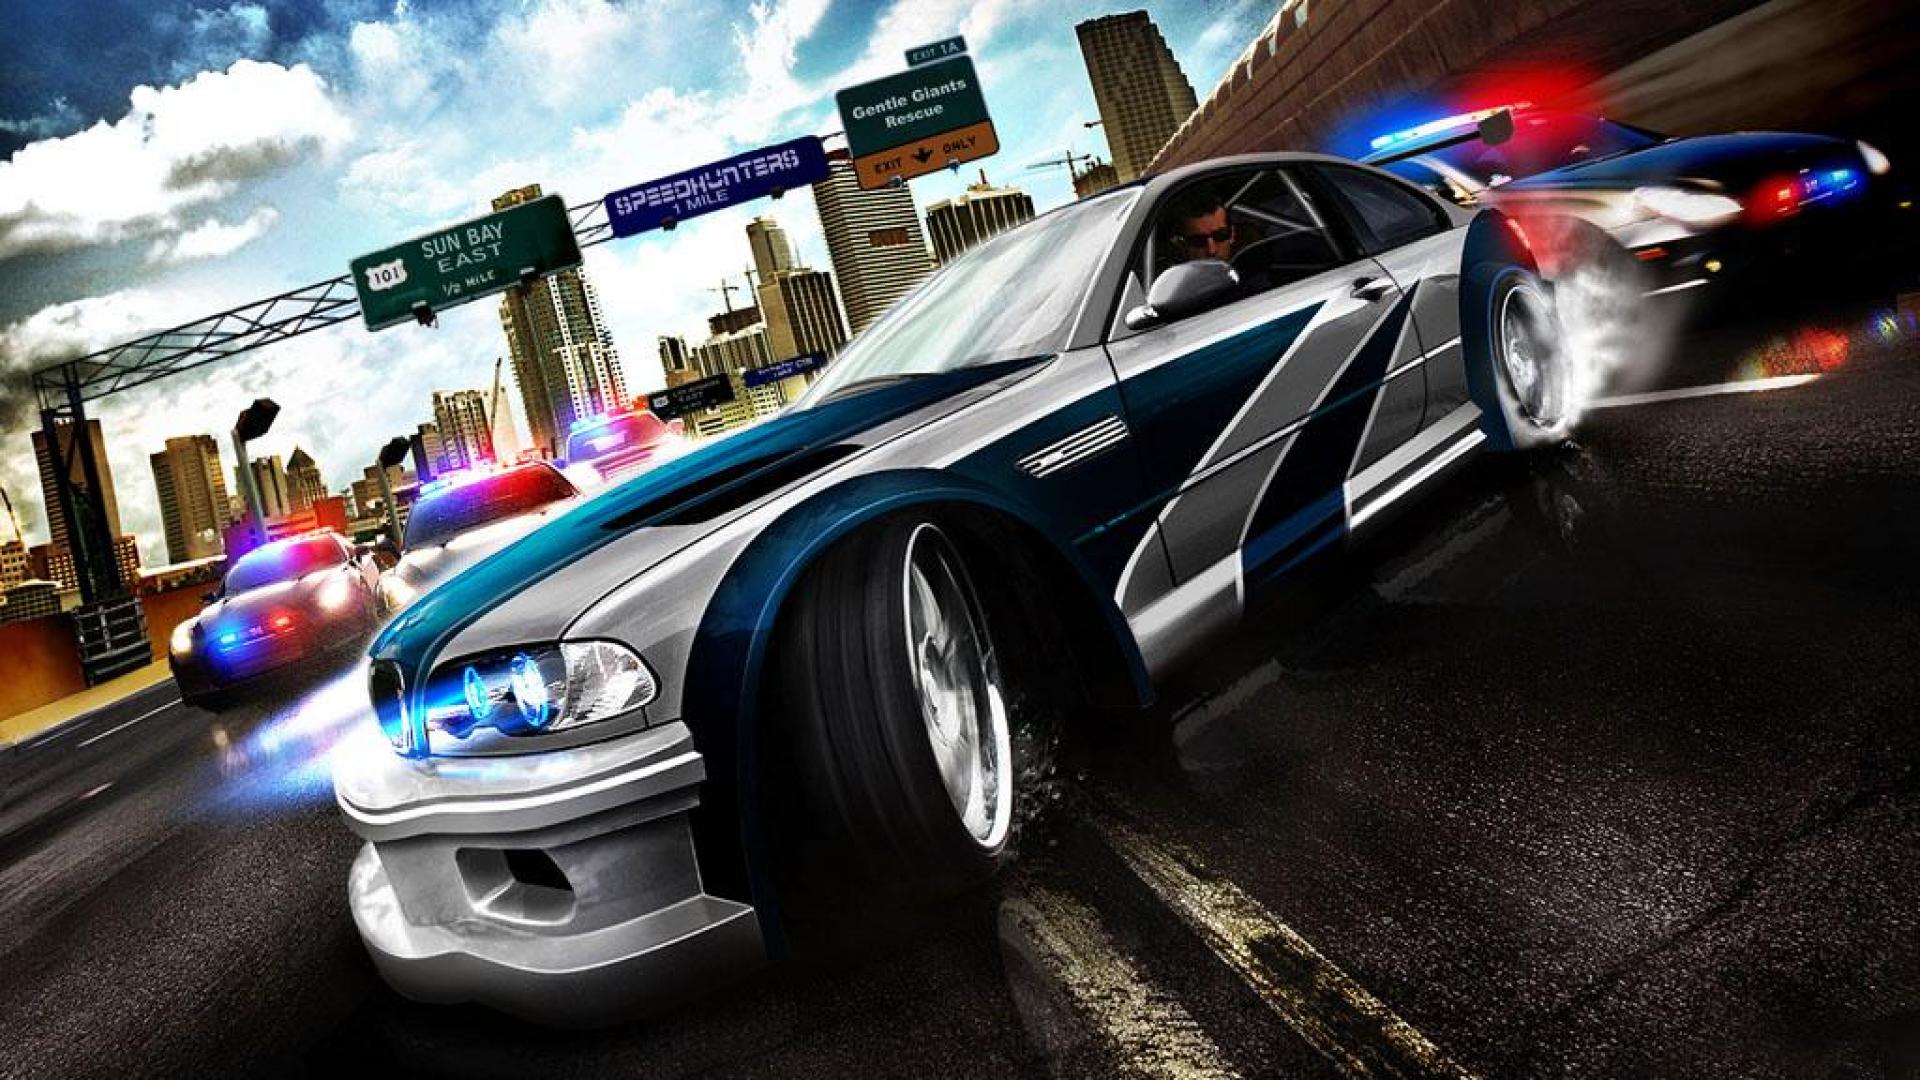 Need For Speed Background Wallpaper High Definition